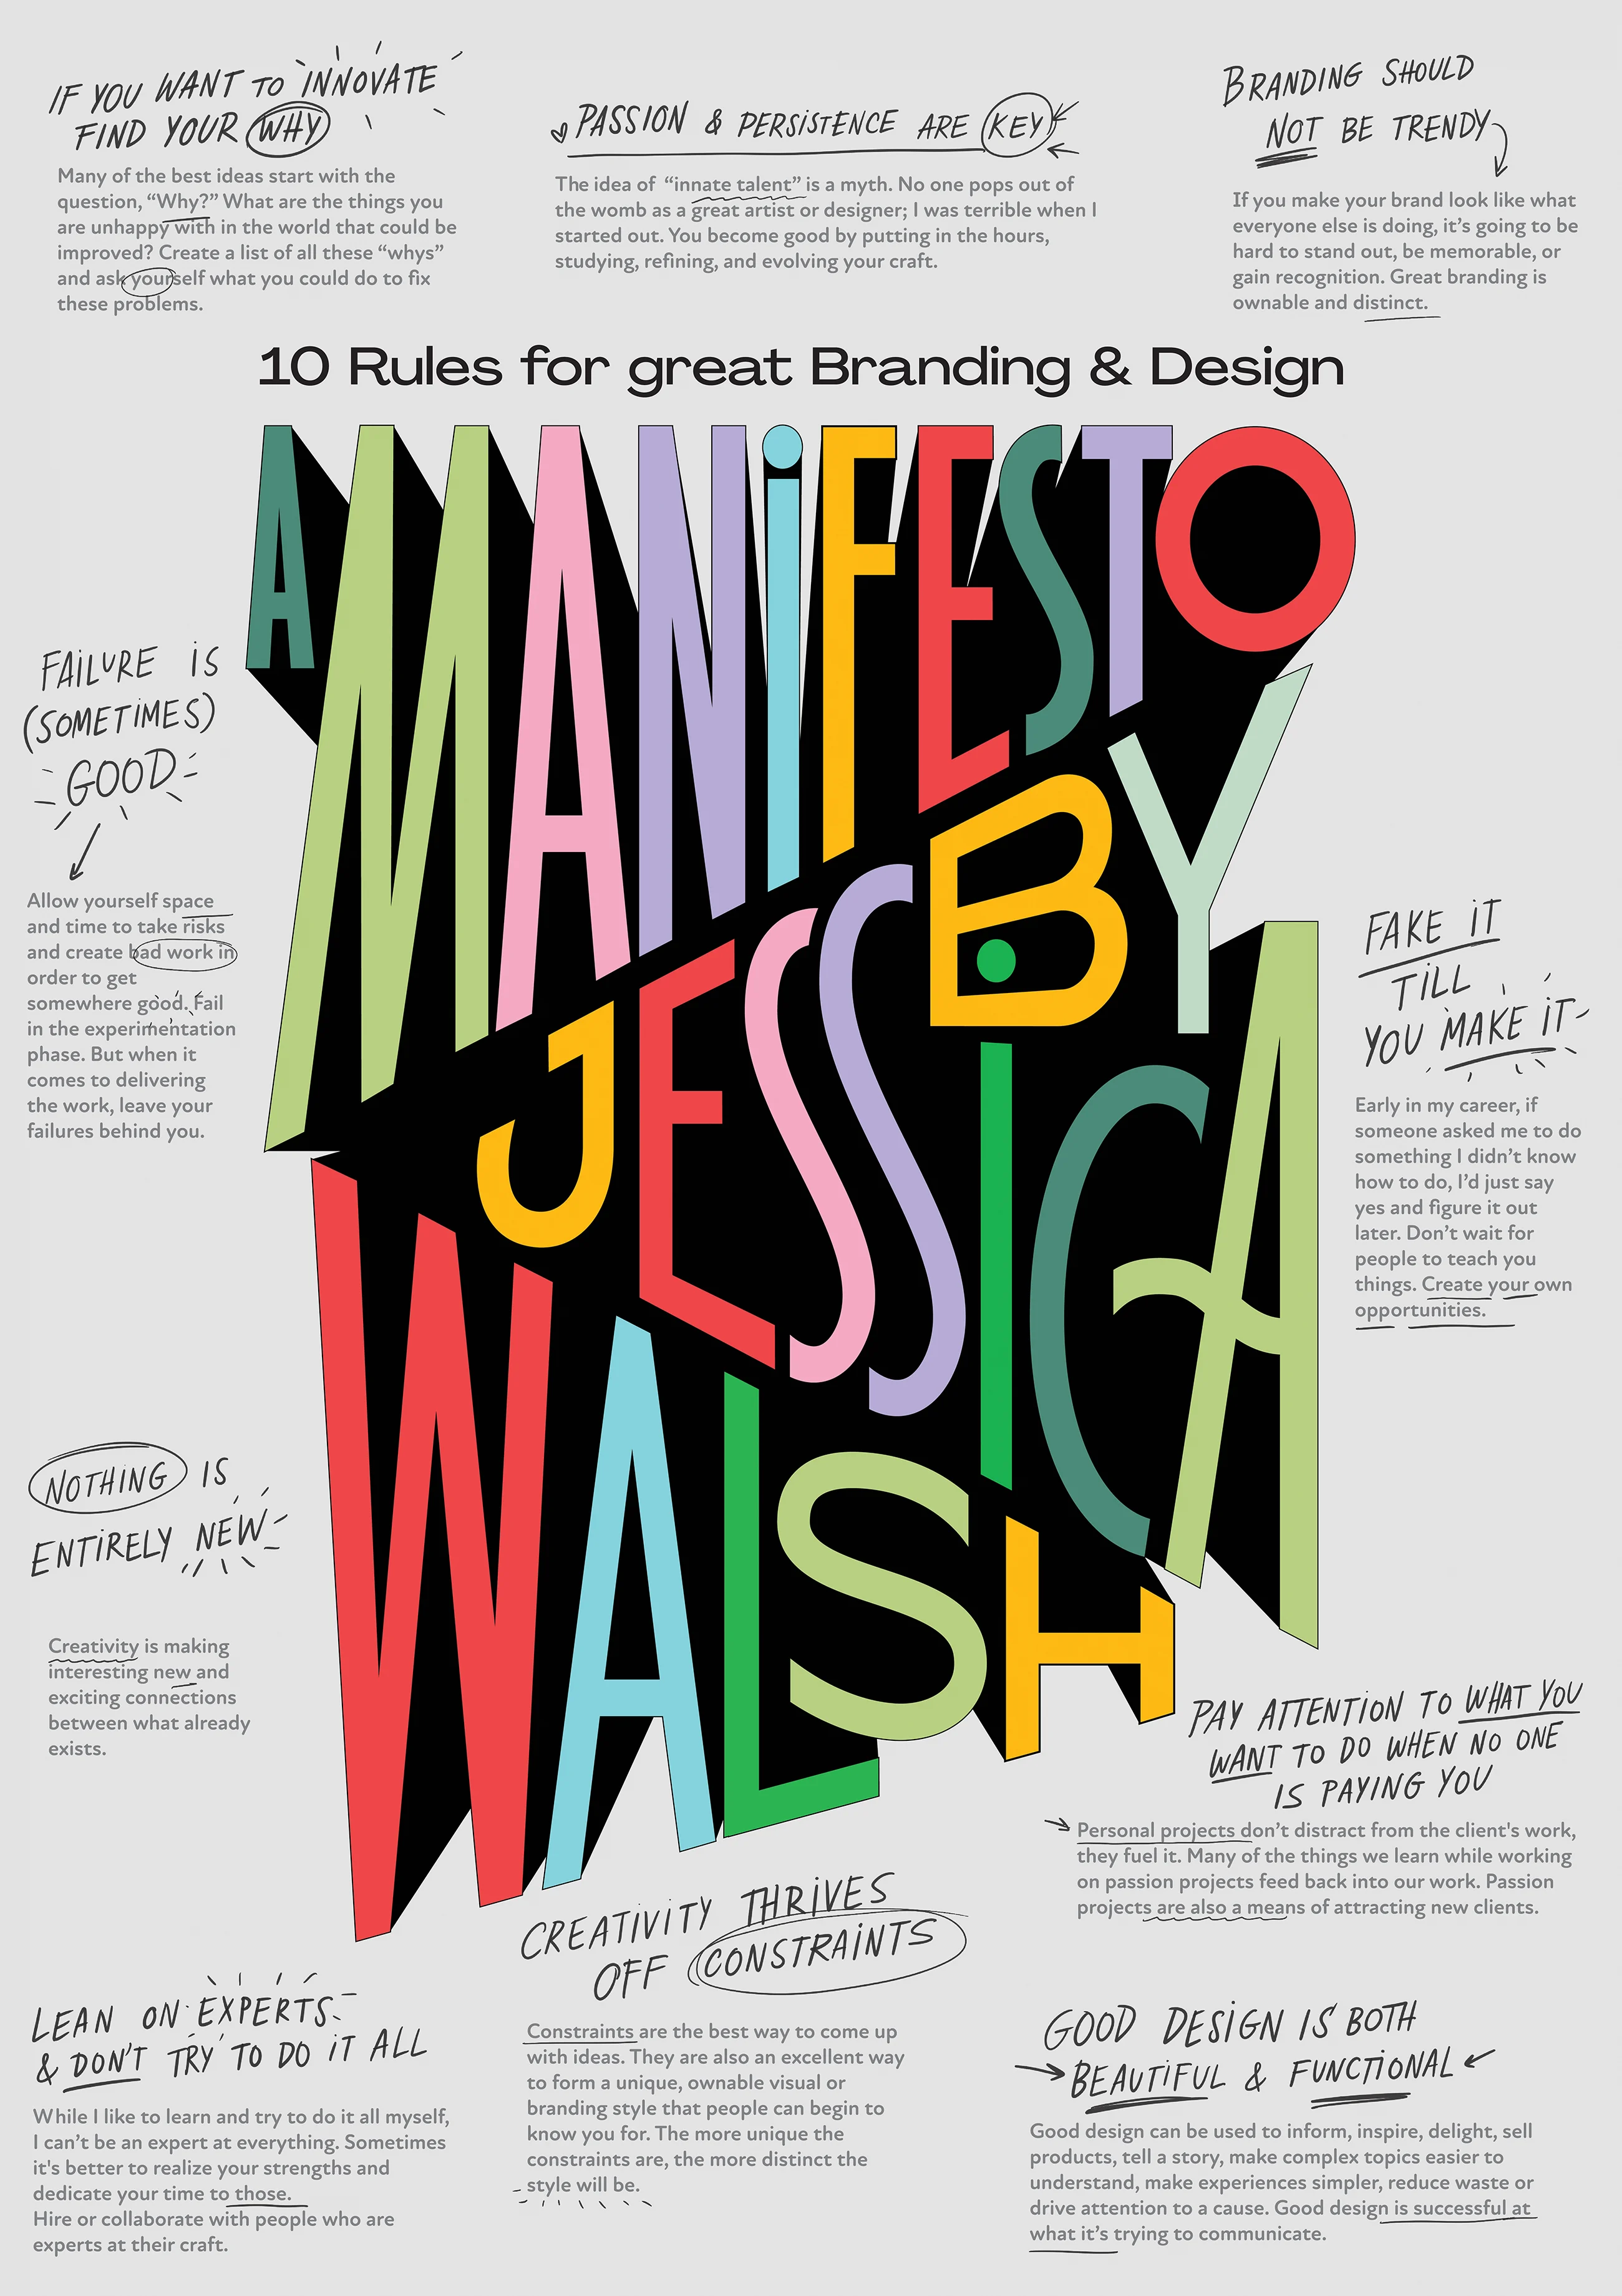 A poster, in portrait mode, that reads “A MANIFESTO BY JESSICA WALSH” in bold, colorful typography. The words are surrounded by ten rules for designers to follow, written in smaller font nearer the edges of the page. A subheading above the main title reads, “10 Rules for great Branding and Design.”